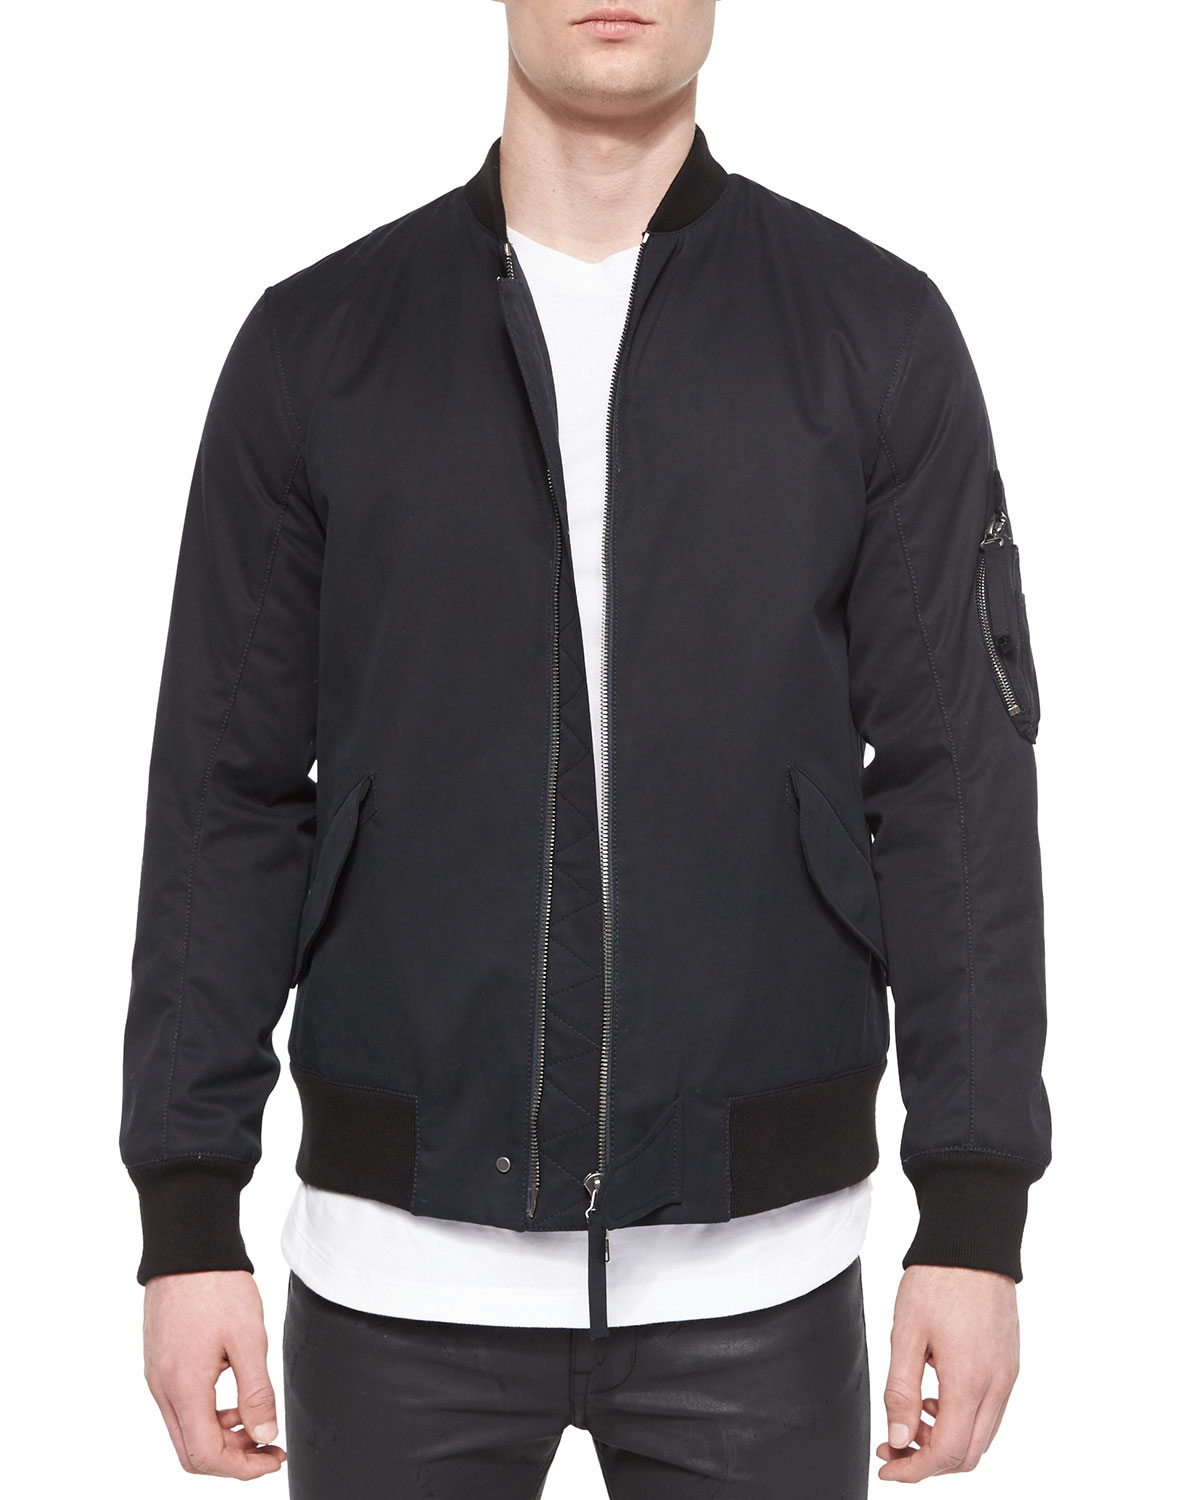 Lyst - Helmut Lang Twill Army Bomber Jacket in Green for Men